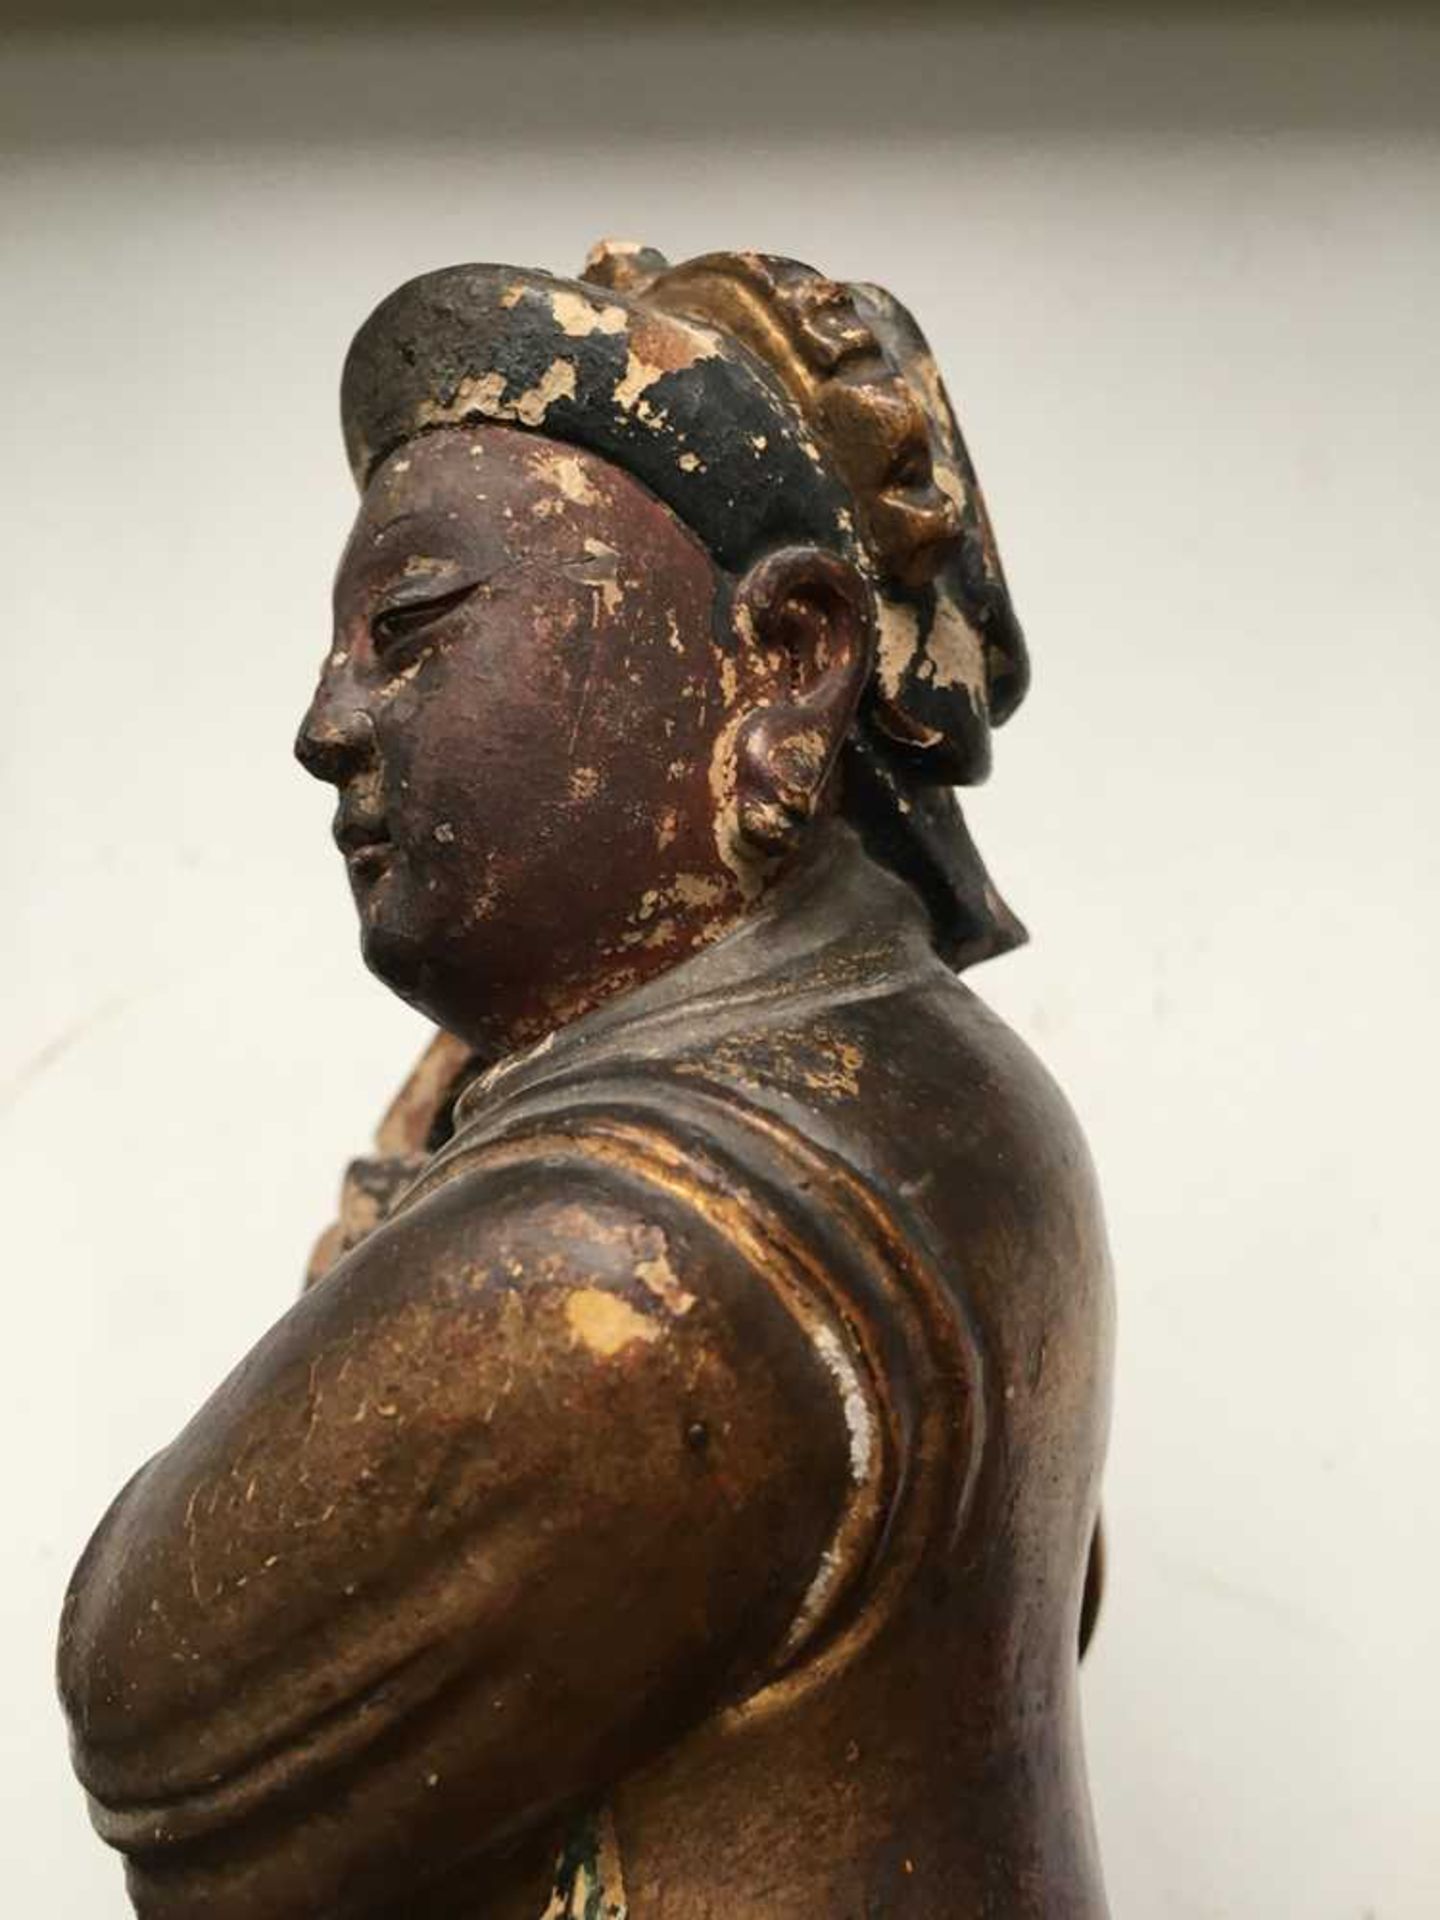 GILT-LACQUERED WOODEN FIGURE OF A DAOIST IMMORTAL QING DYNASTY, 18TH-19TH CENTURY - Image 14 of 20